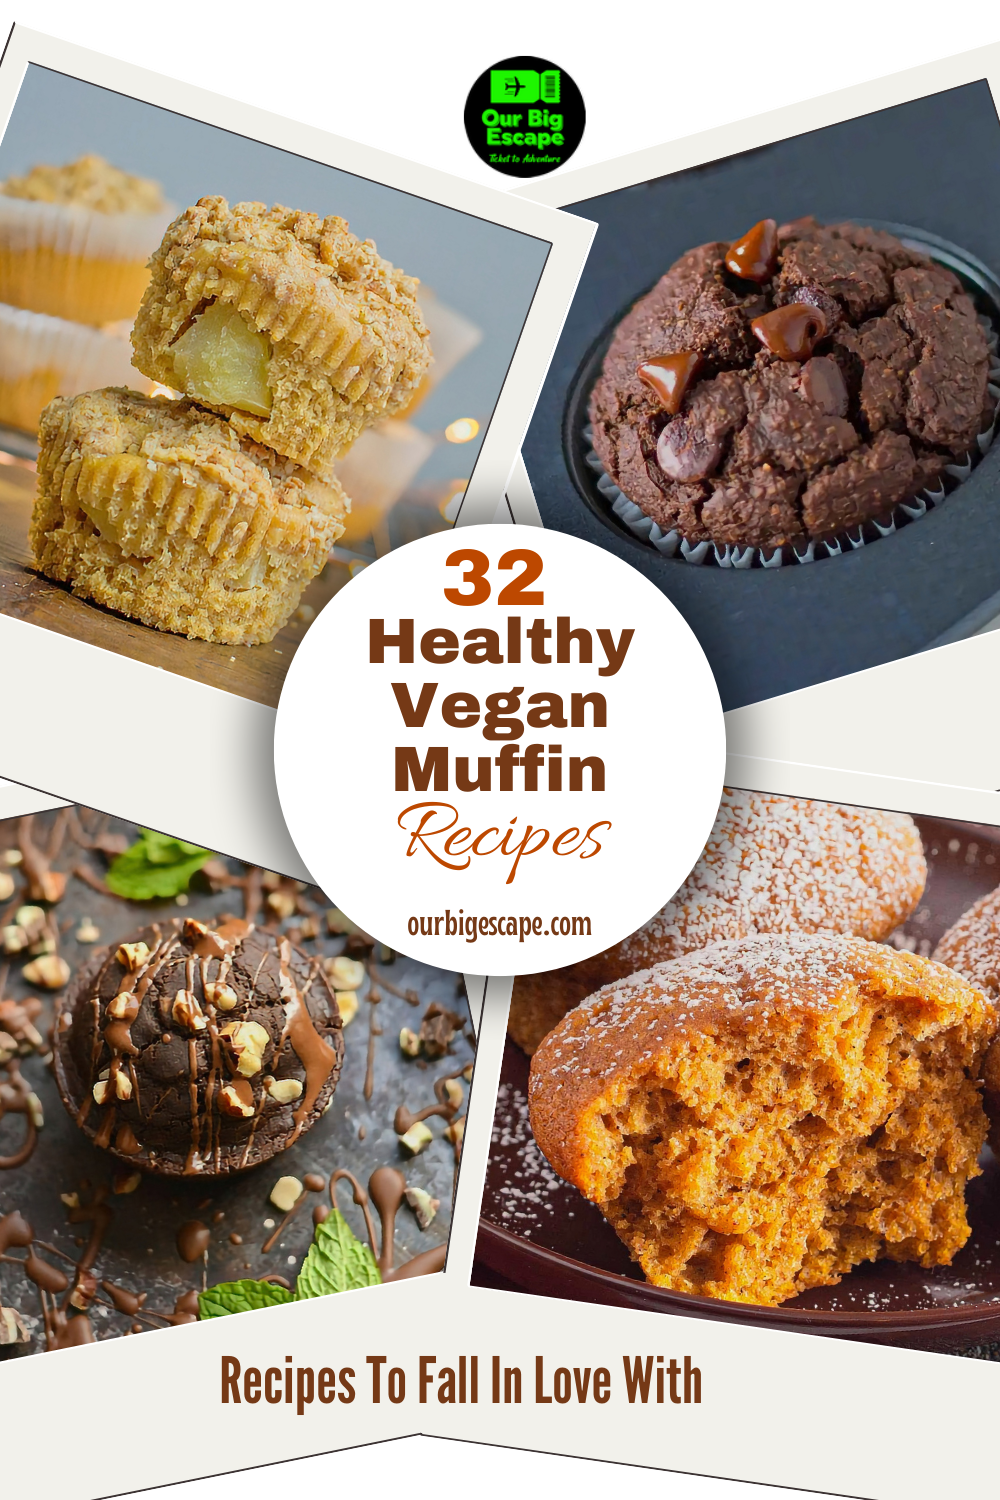 32 Healthy Vegan Muffin Recipes To Fall In Love With - 10 Minute Vegetarian Indian Recipes